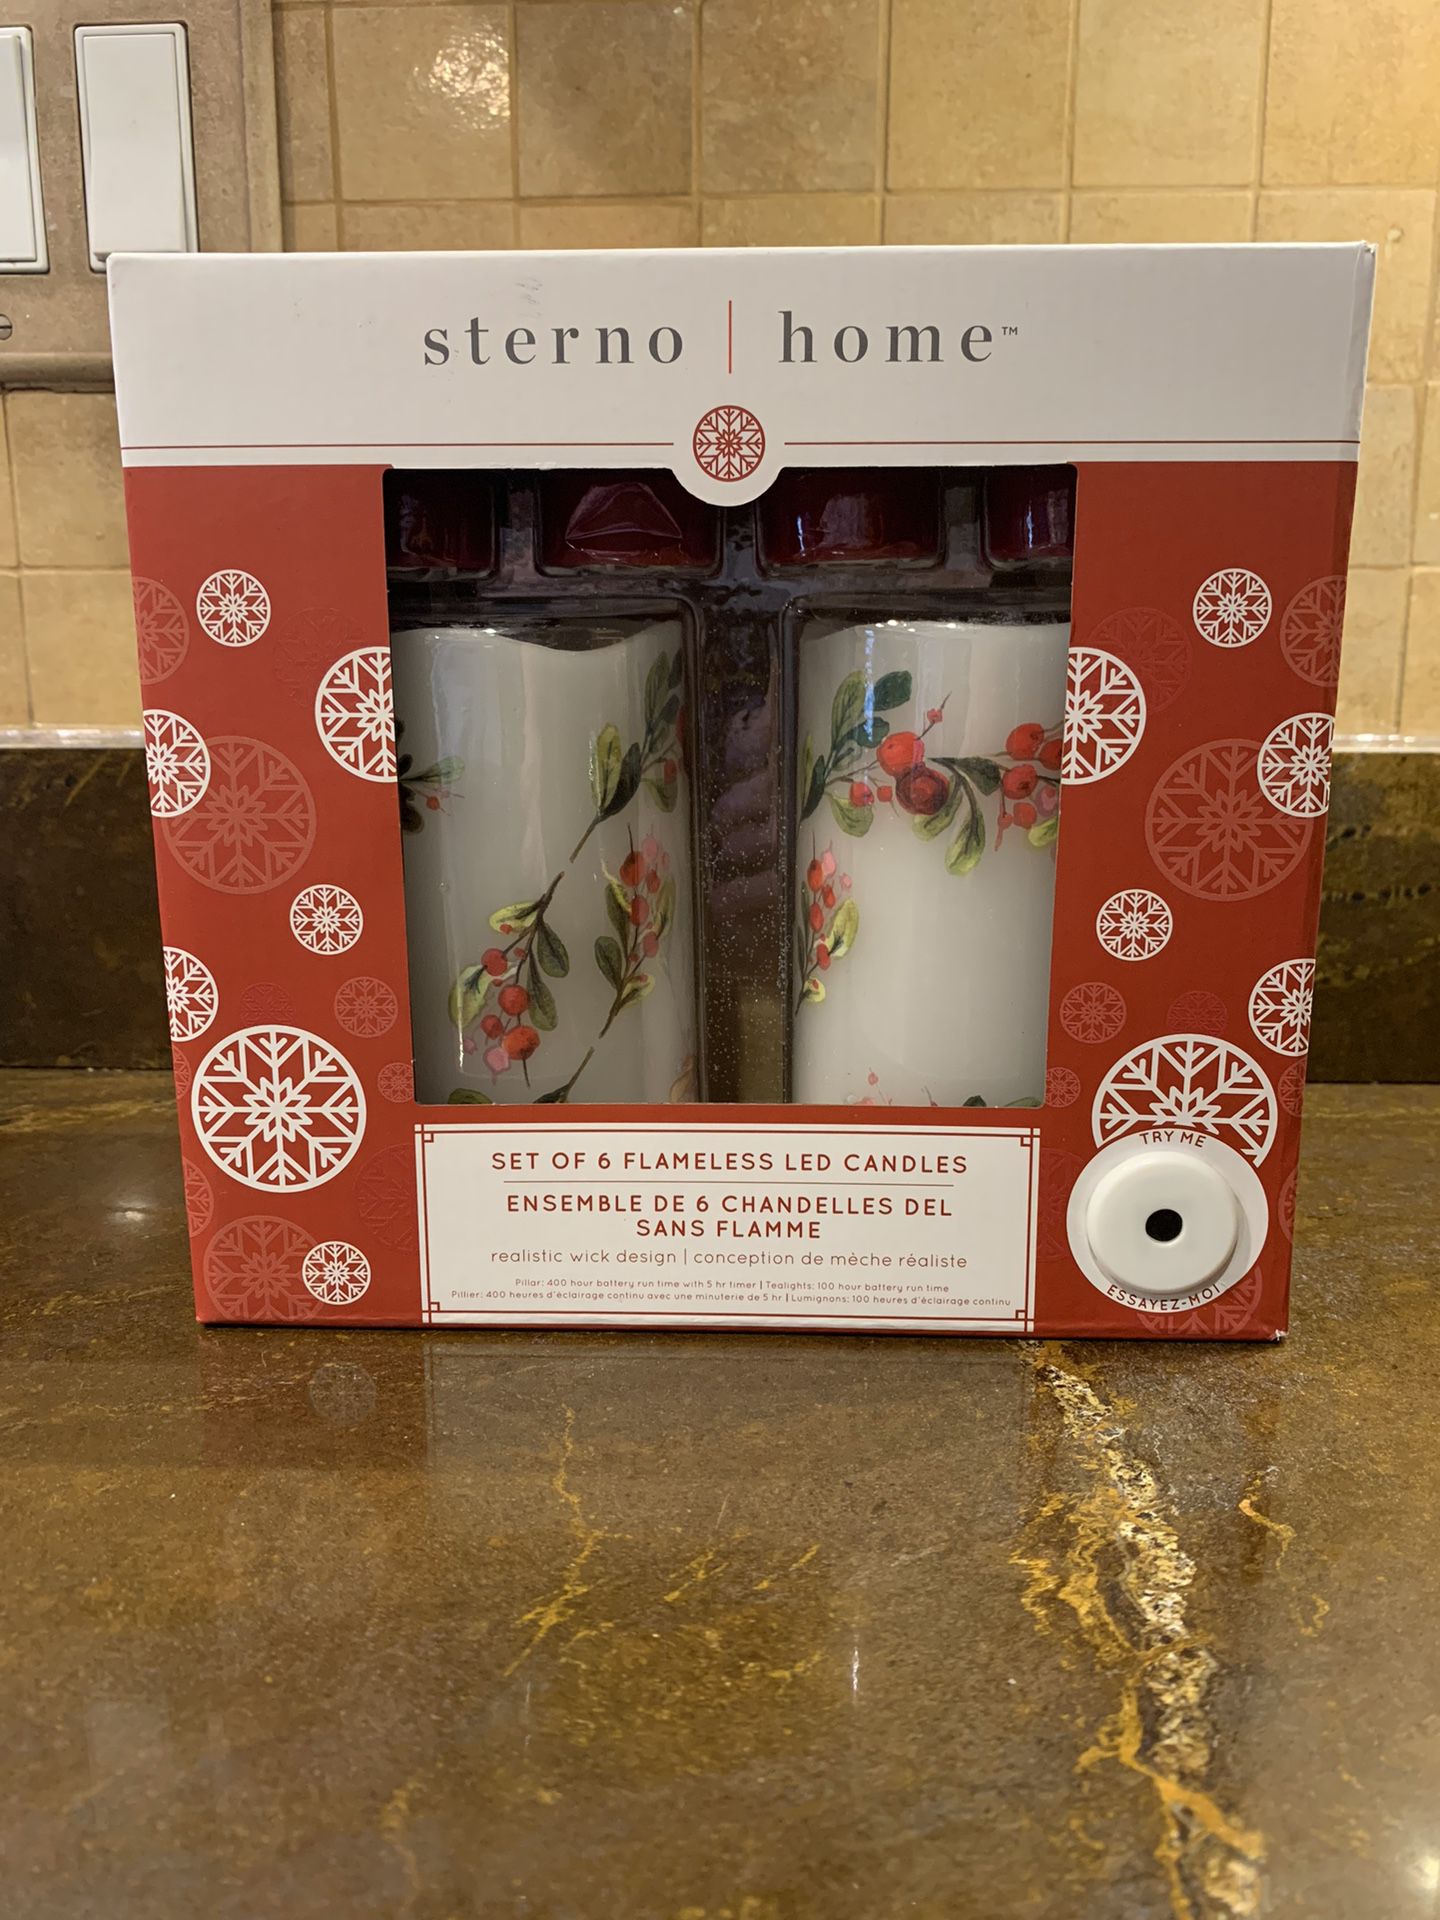 NIB Set of 6 Flameless Led Candles by Sterno Home- 4 red votives/2 pillars -berries see photos